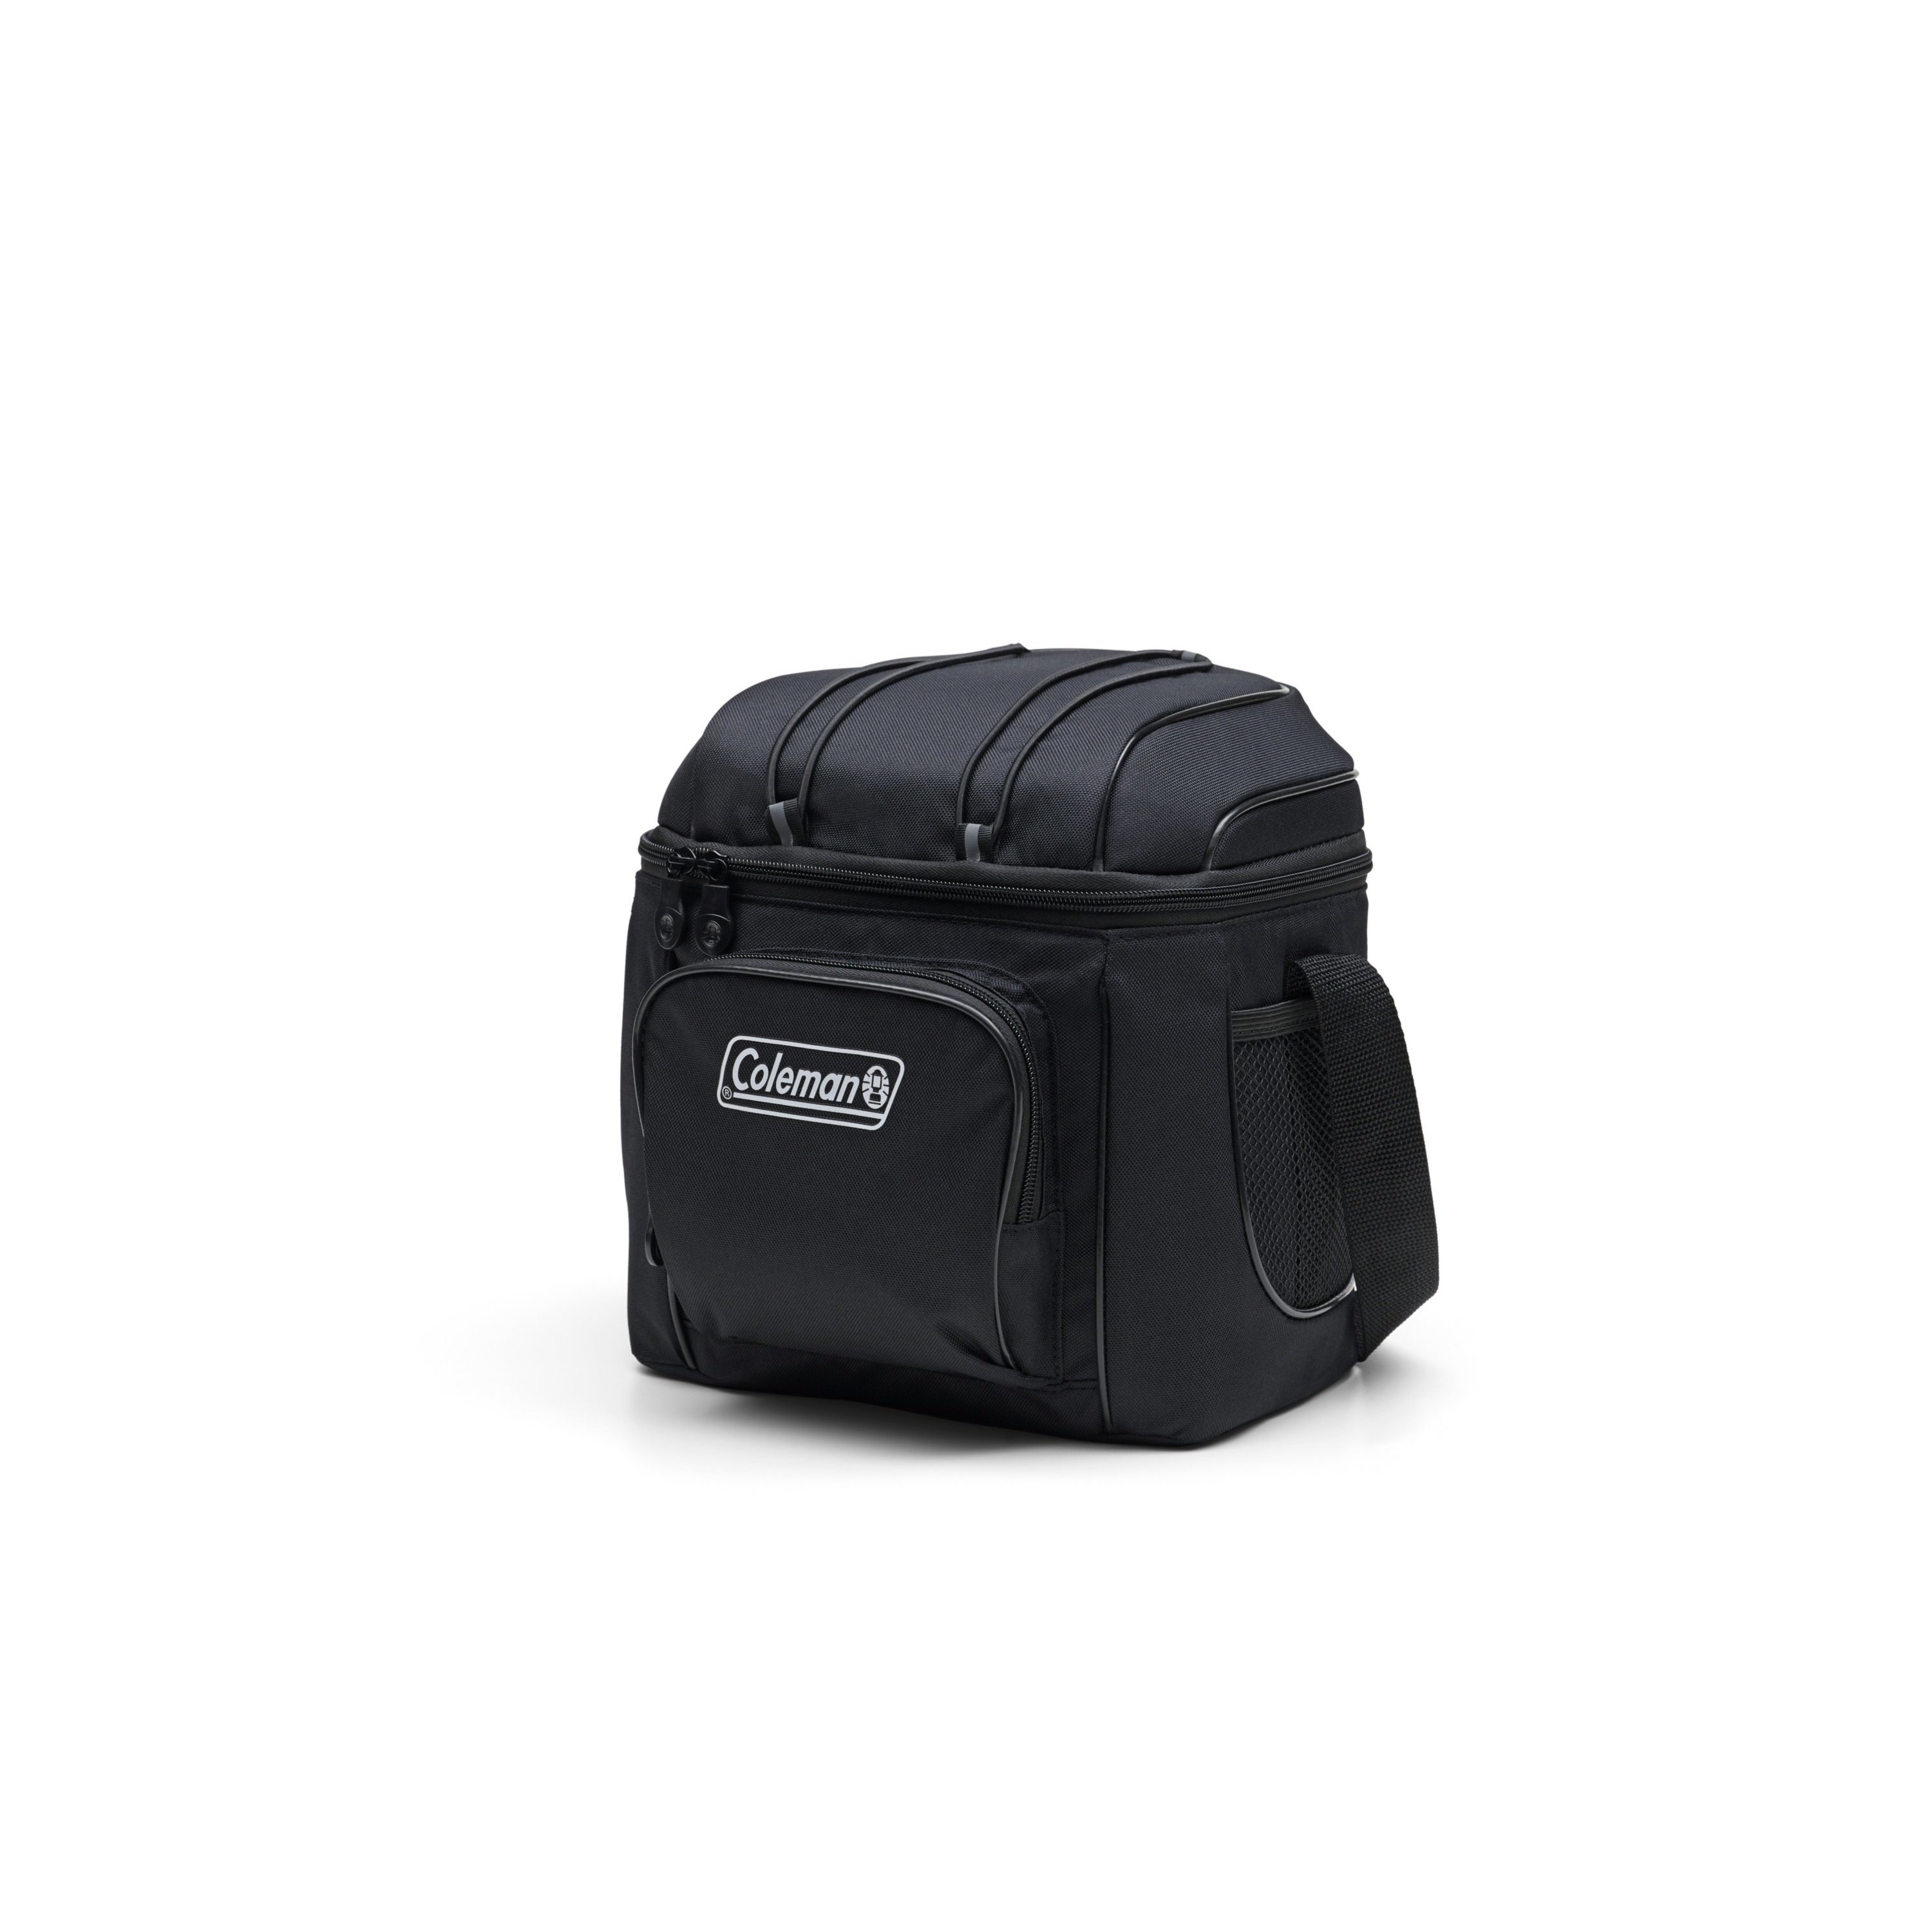 Coleman CHILLER 9-cans Insulated Soft Cooler Bag, Black - image 2 of 5